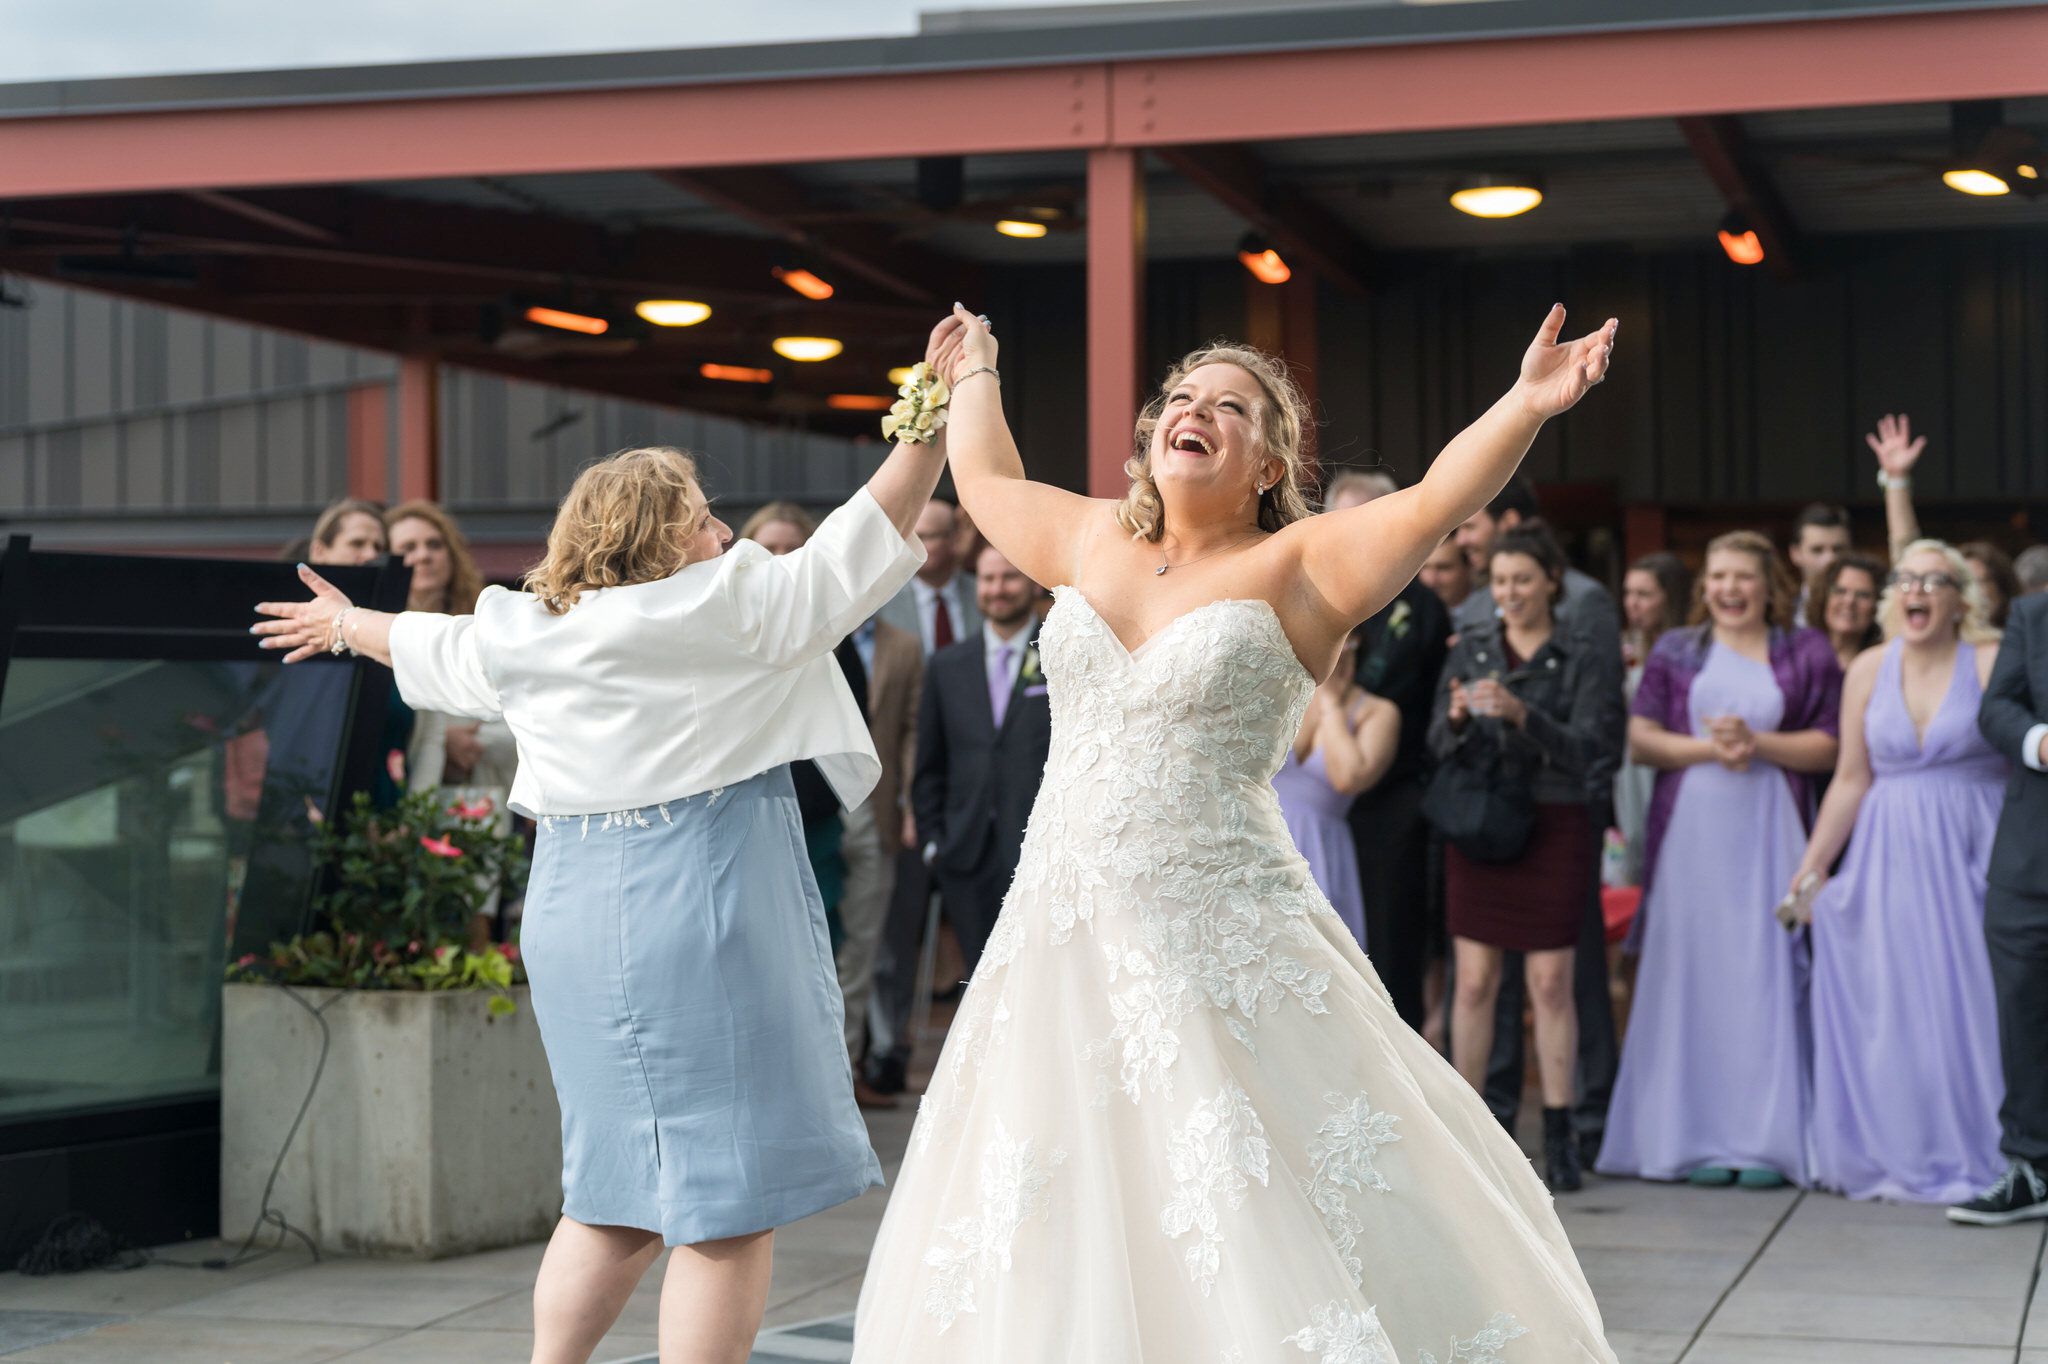 The bride and her mom share an emotional first dance at a Madison Building wedding in Detroit. 